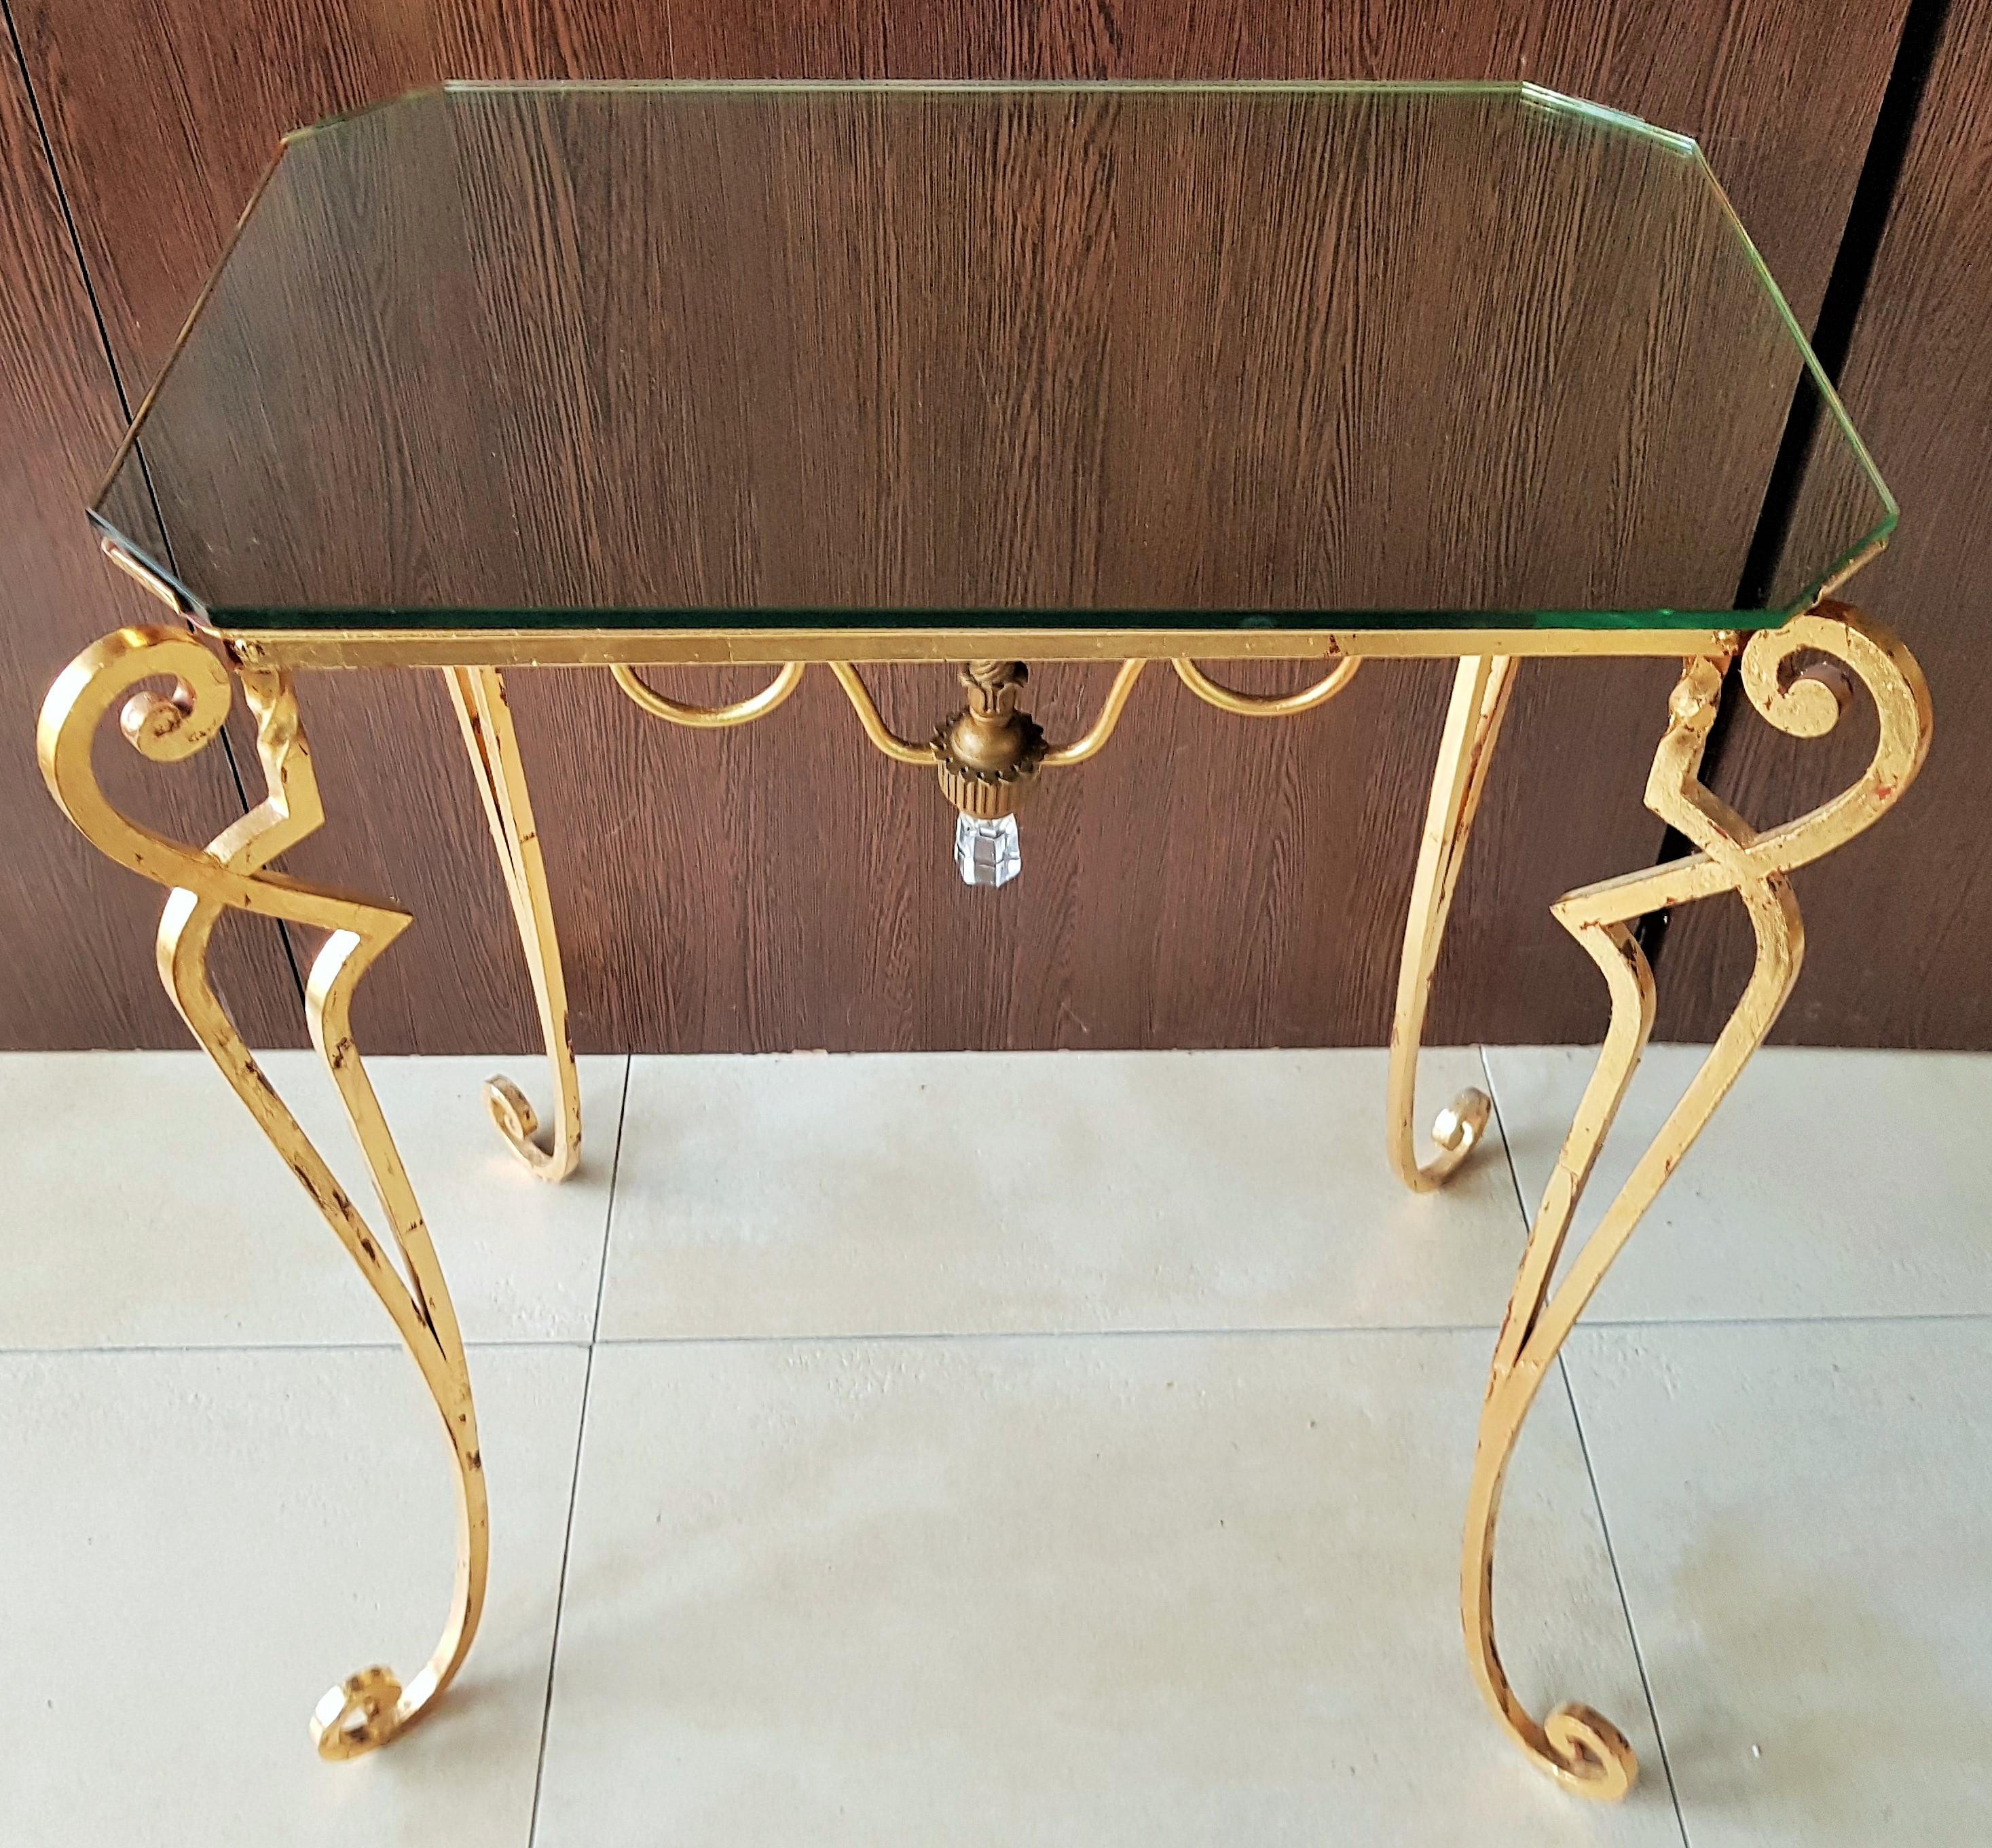 Mid-20th Century Wrought Iron Art Deco Console Side Table Attributed to Drouet, France, 1940